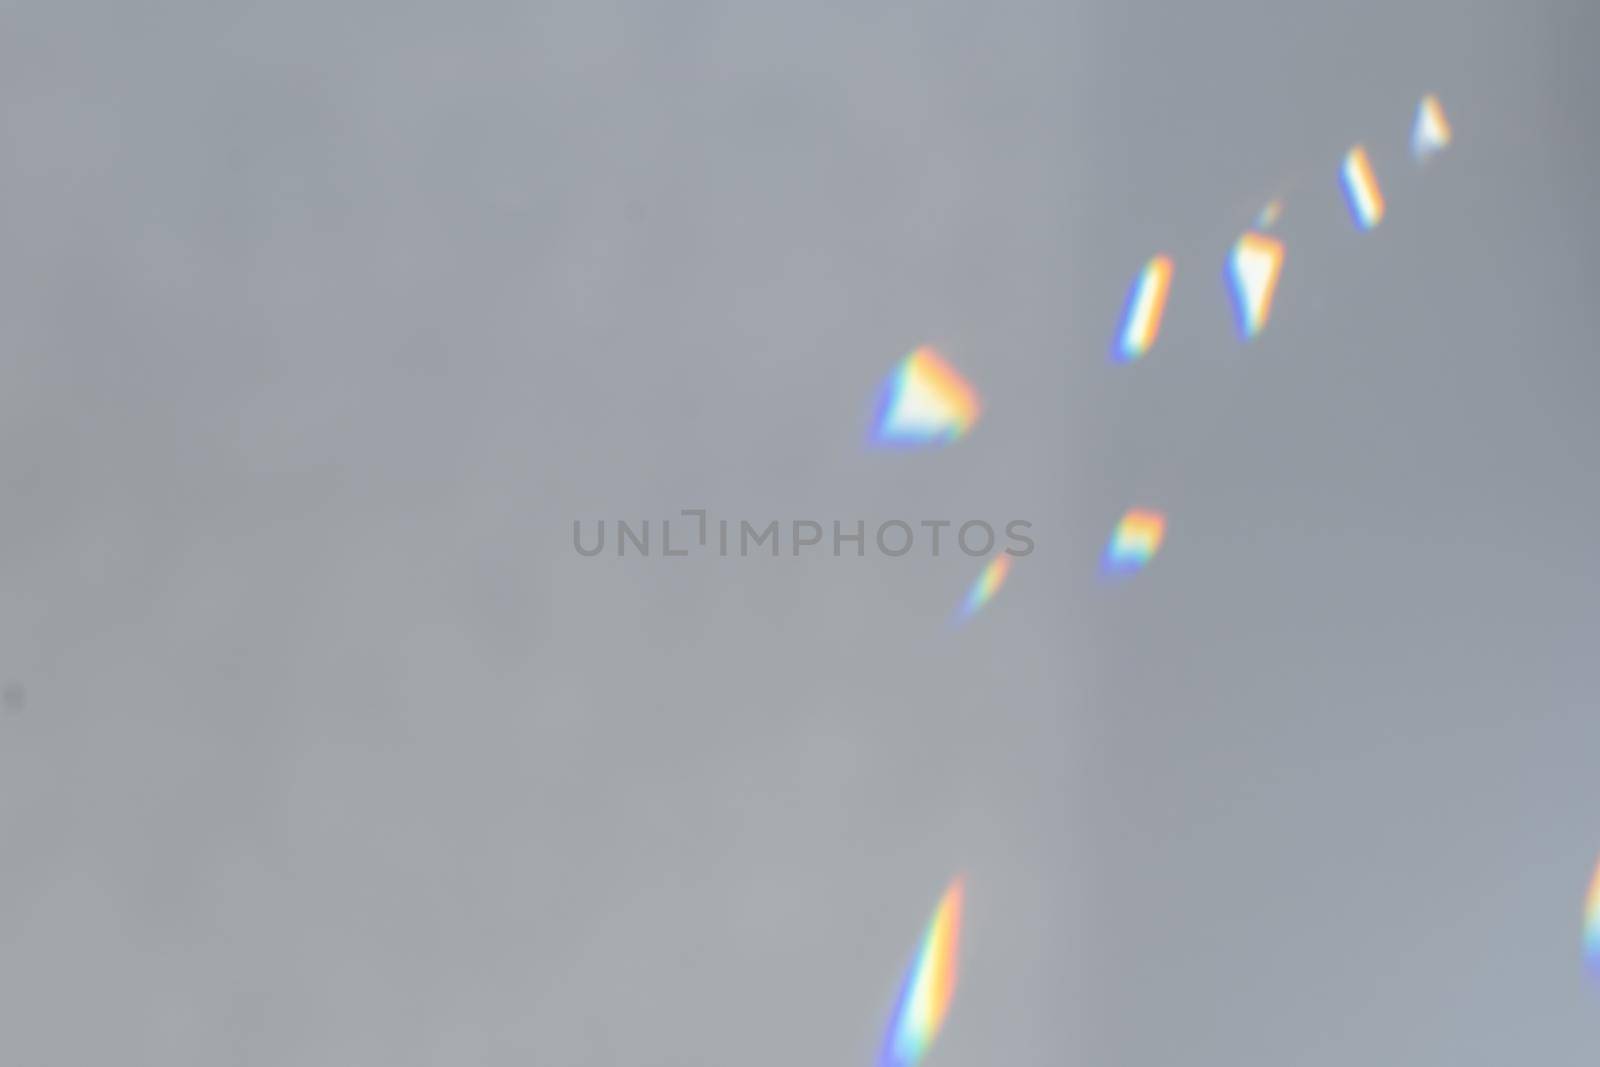 .Crystal light reflections for overlay mockup on light background. Rainbow holographic shadow mock up, iridescent prismatic wallpaper. Abstract prism reflection, rays leaking through lens effect.